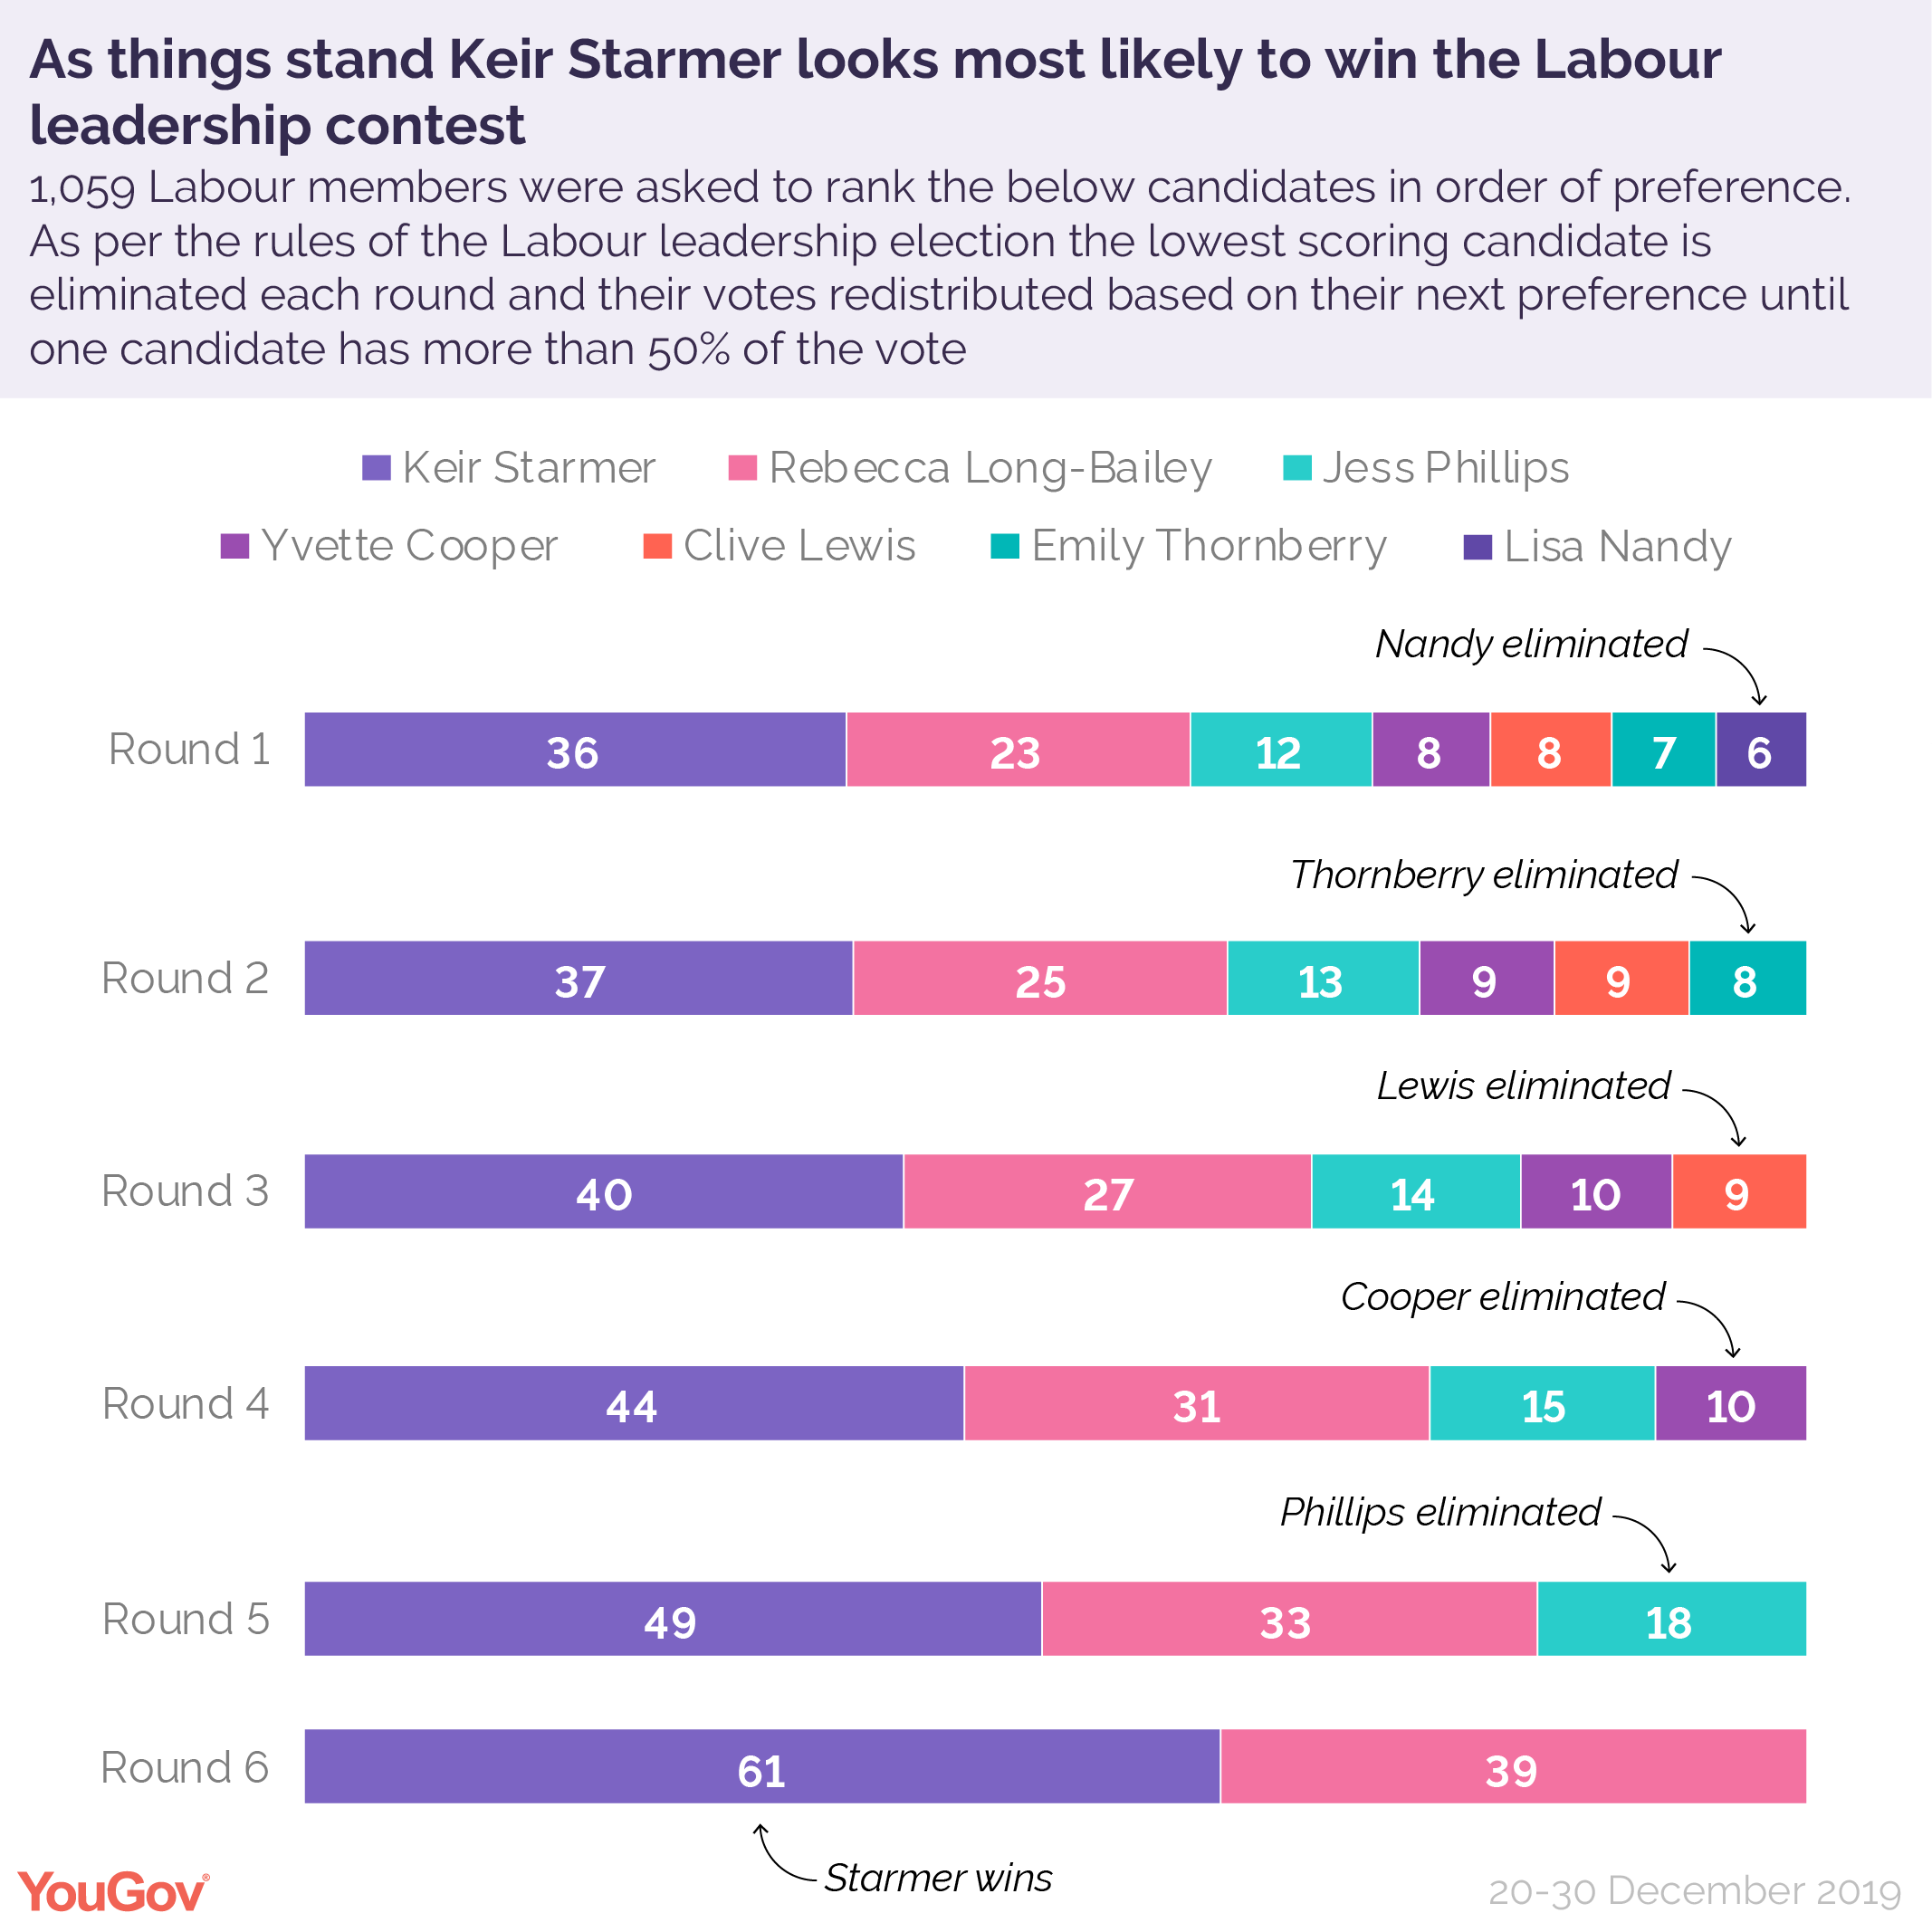 Keir%20Starmer%20most%20likely%20win%20Labour%20leadership%20election.png